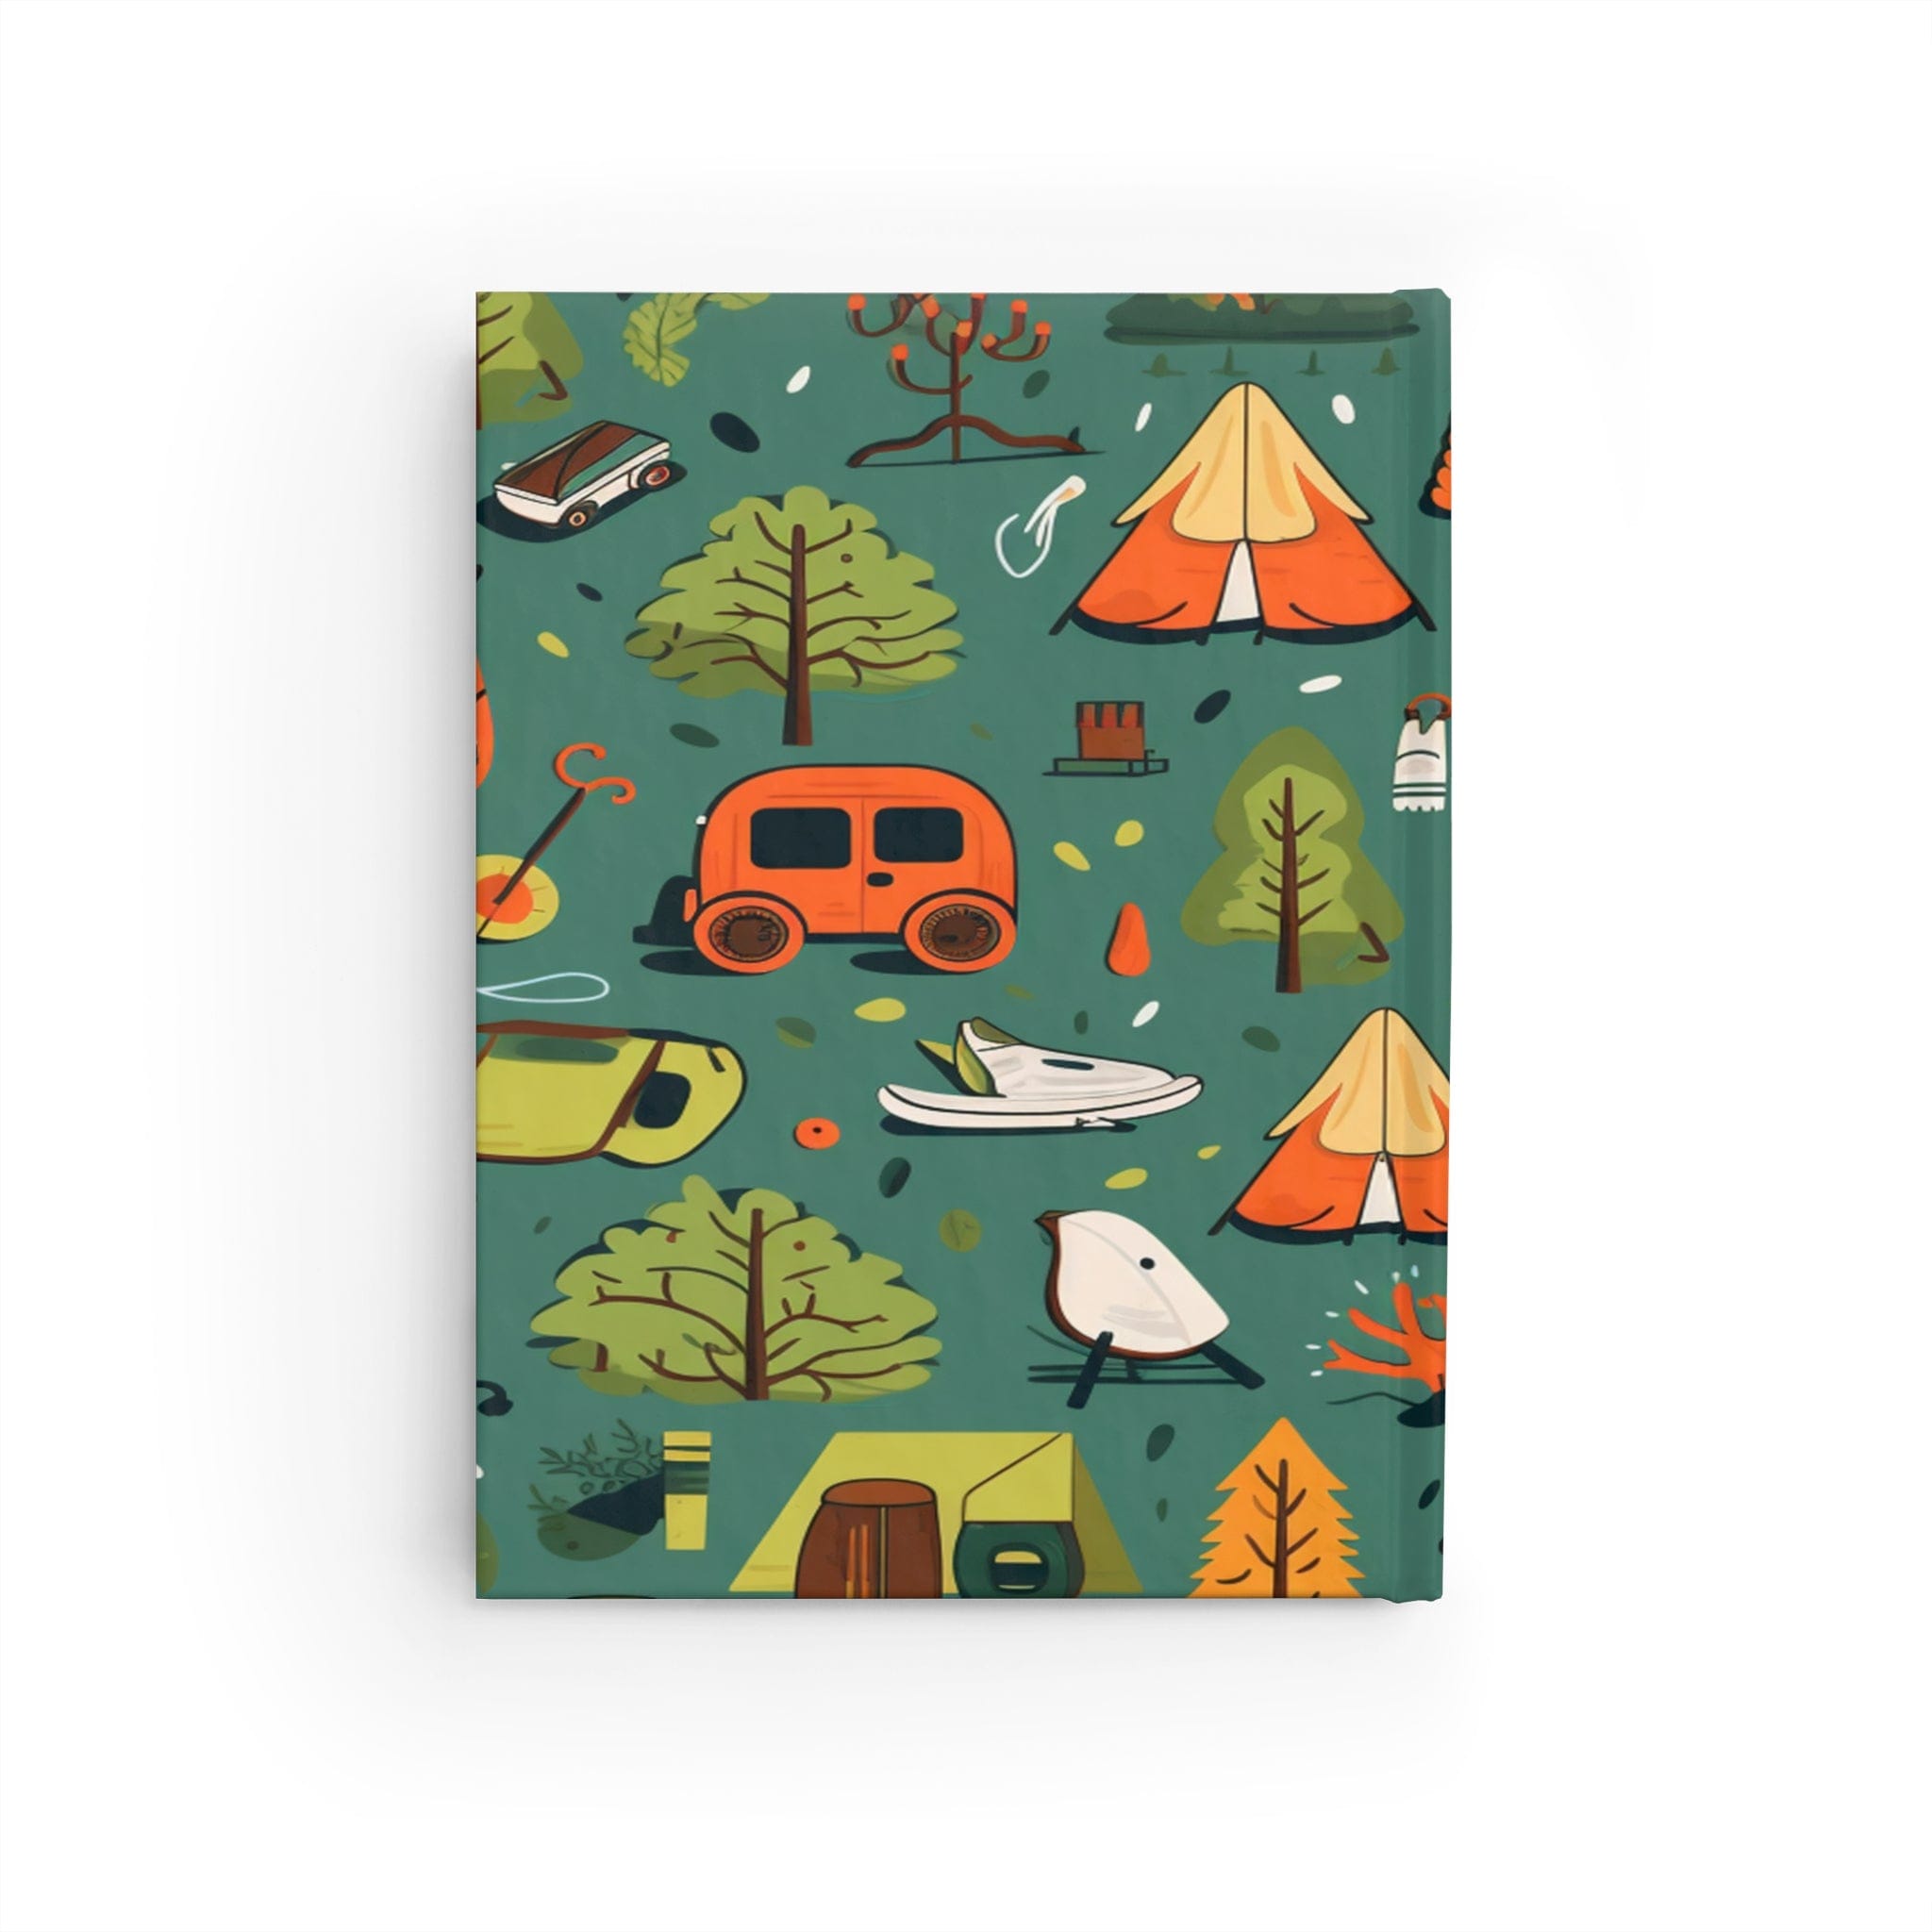 Campingfanstore Hardcover Journal With 128 Blank Pages